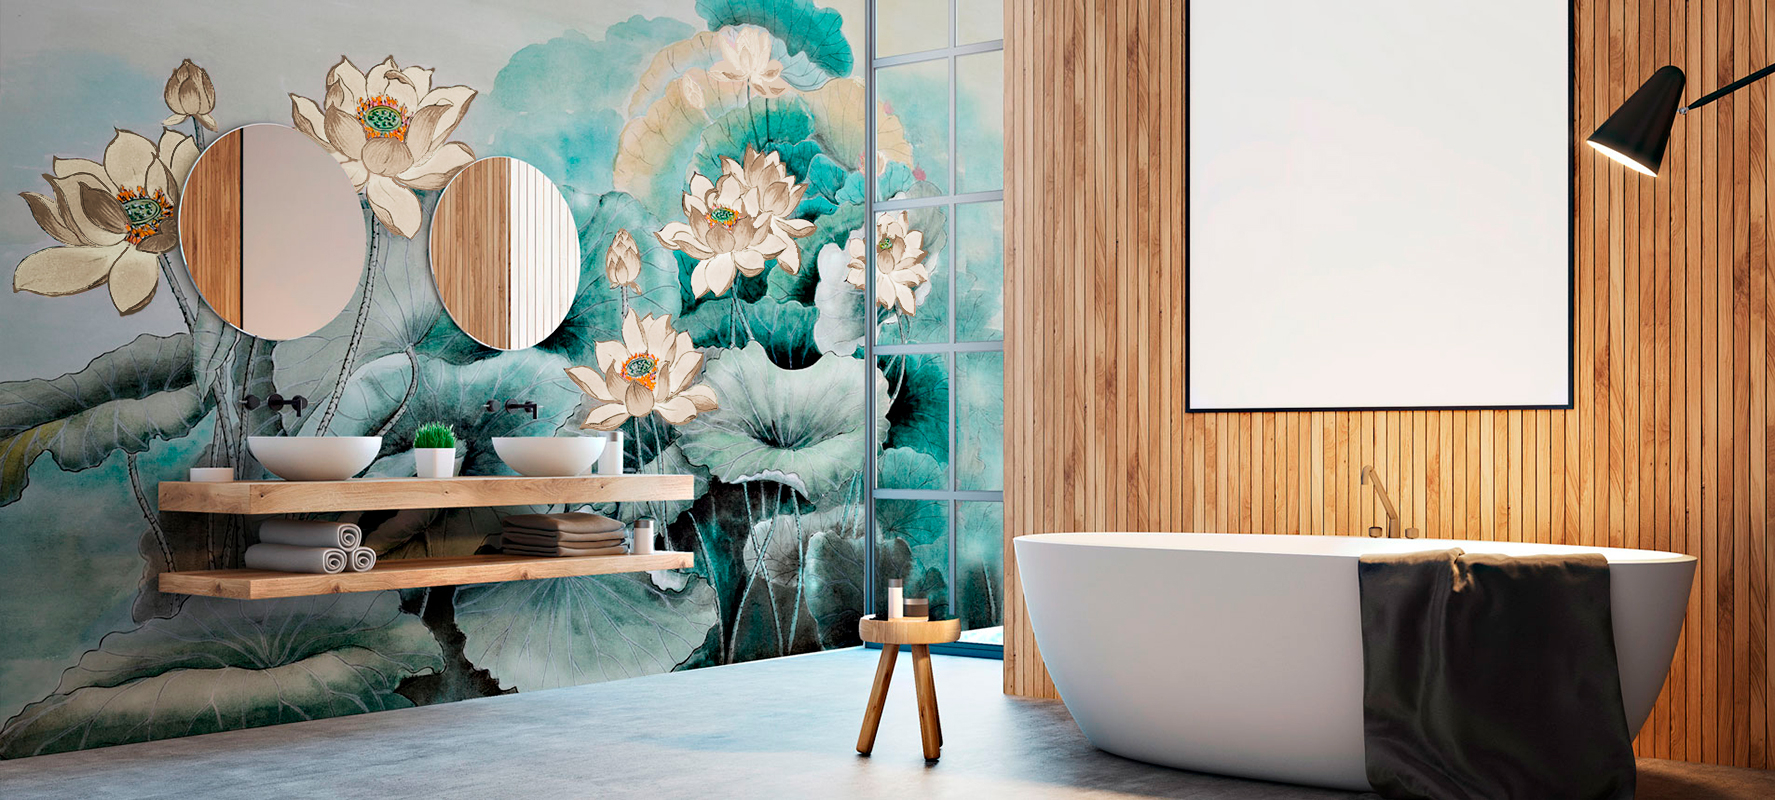 Washable wallpapers
for bathroom